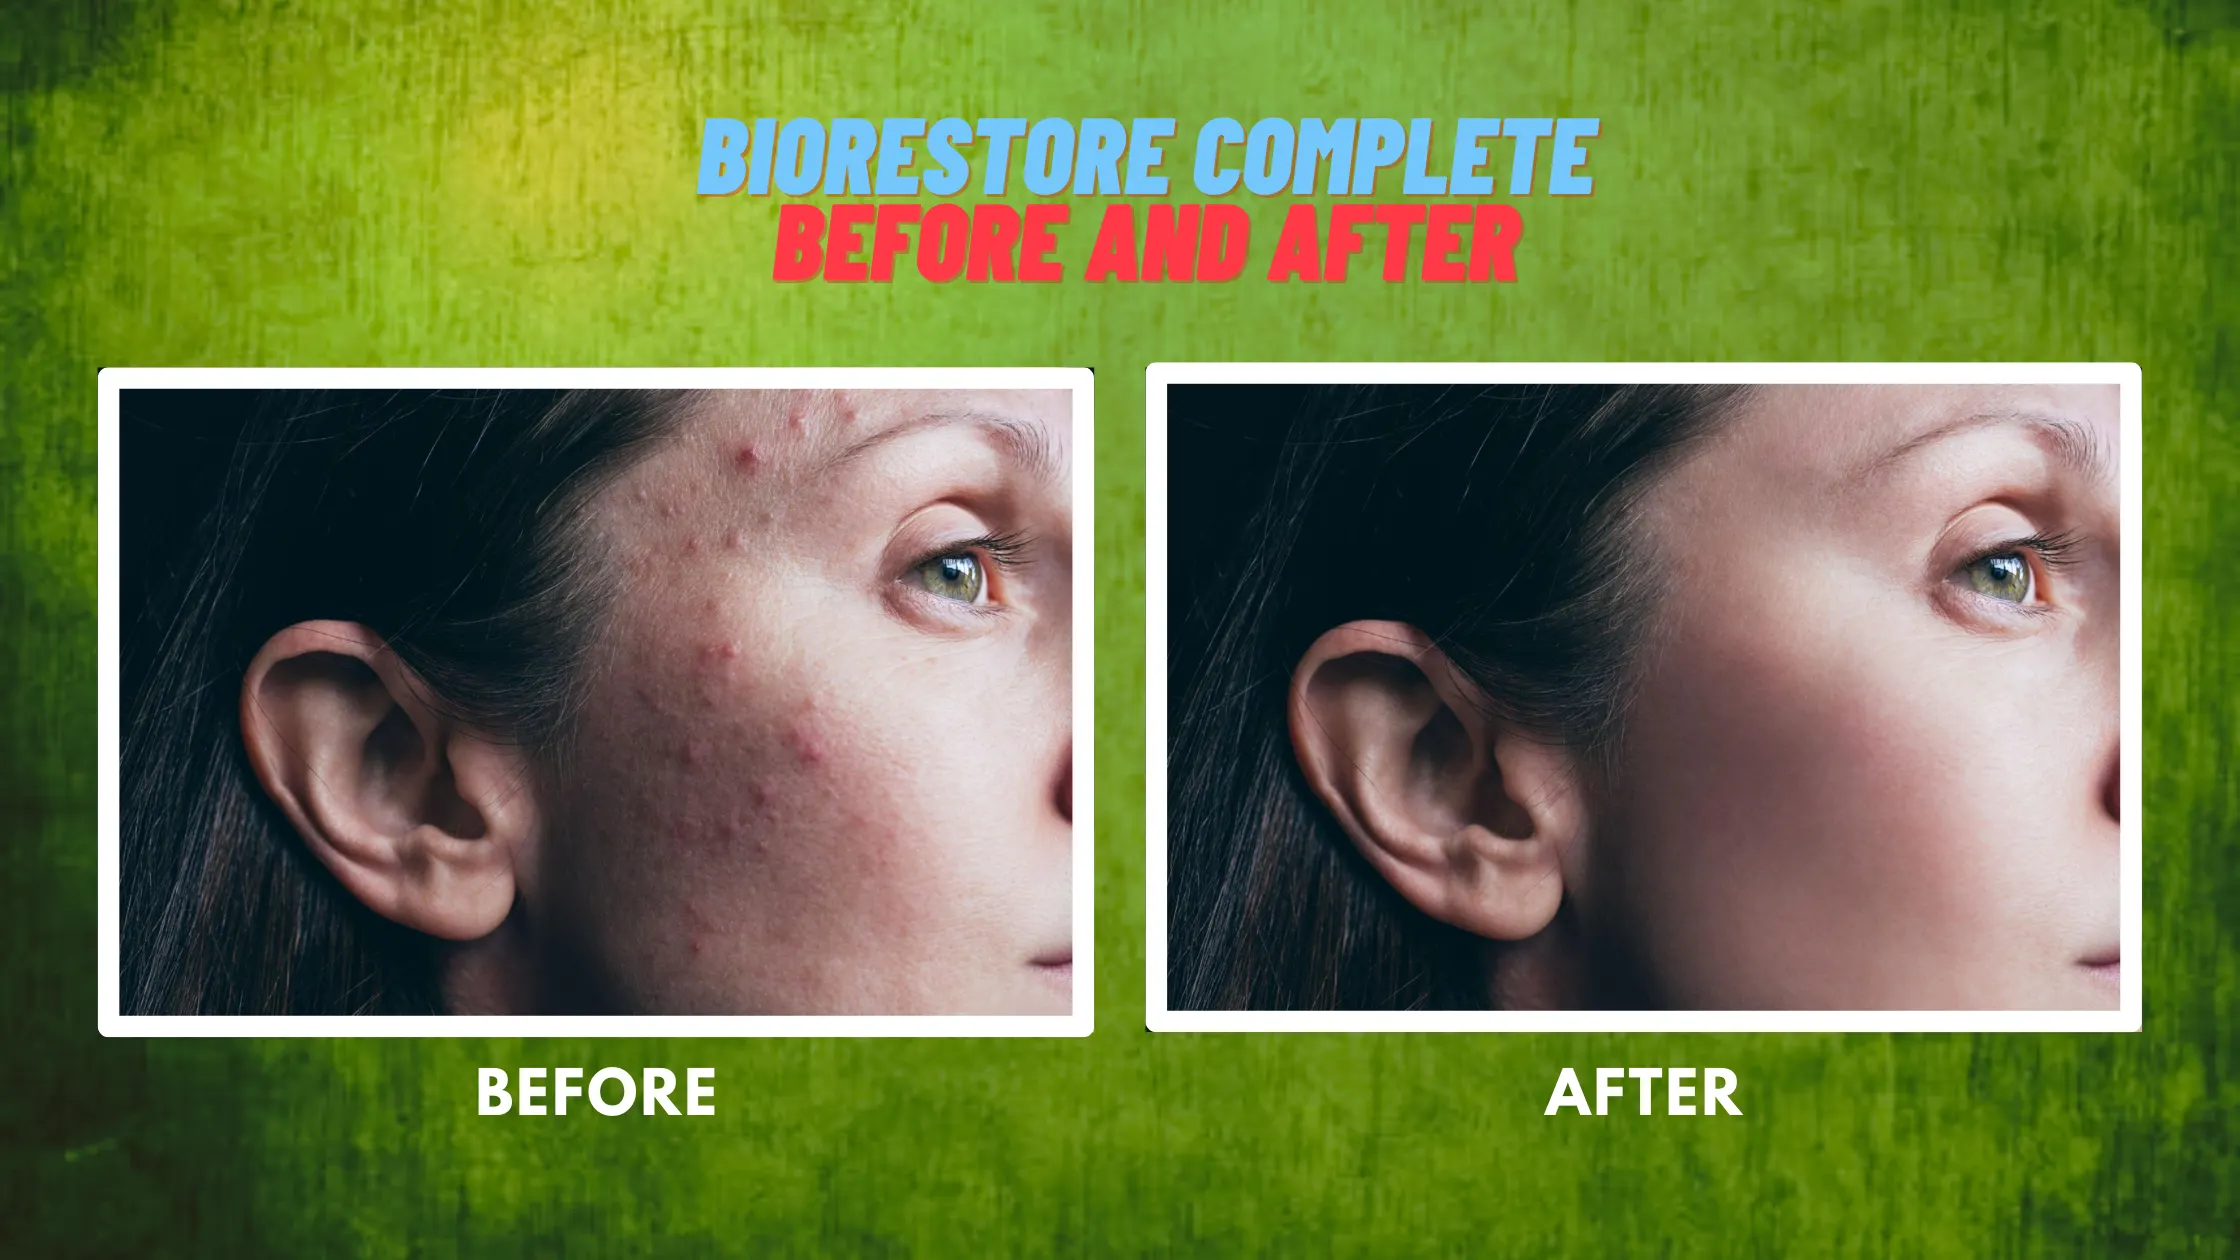 BioRestore Complete before and after